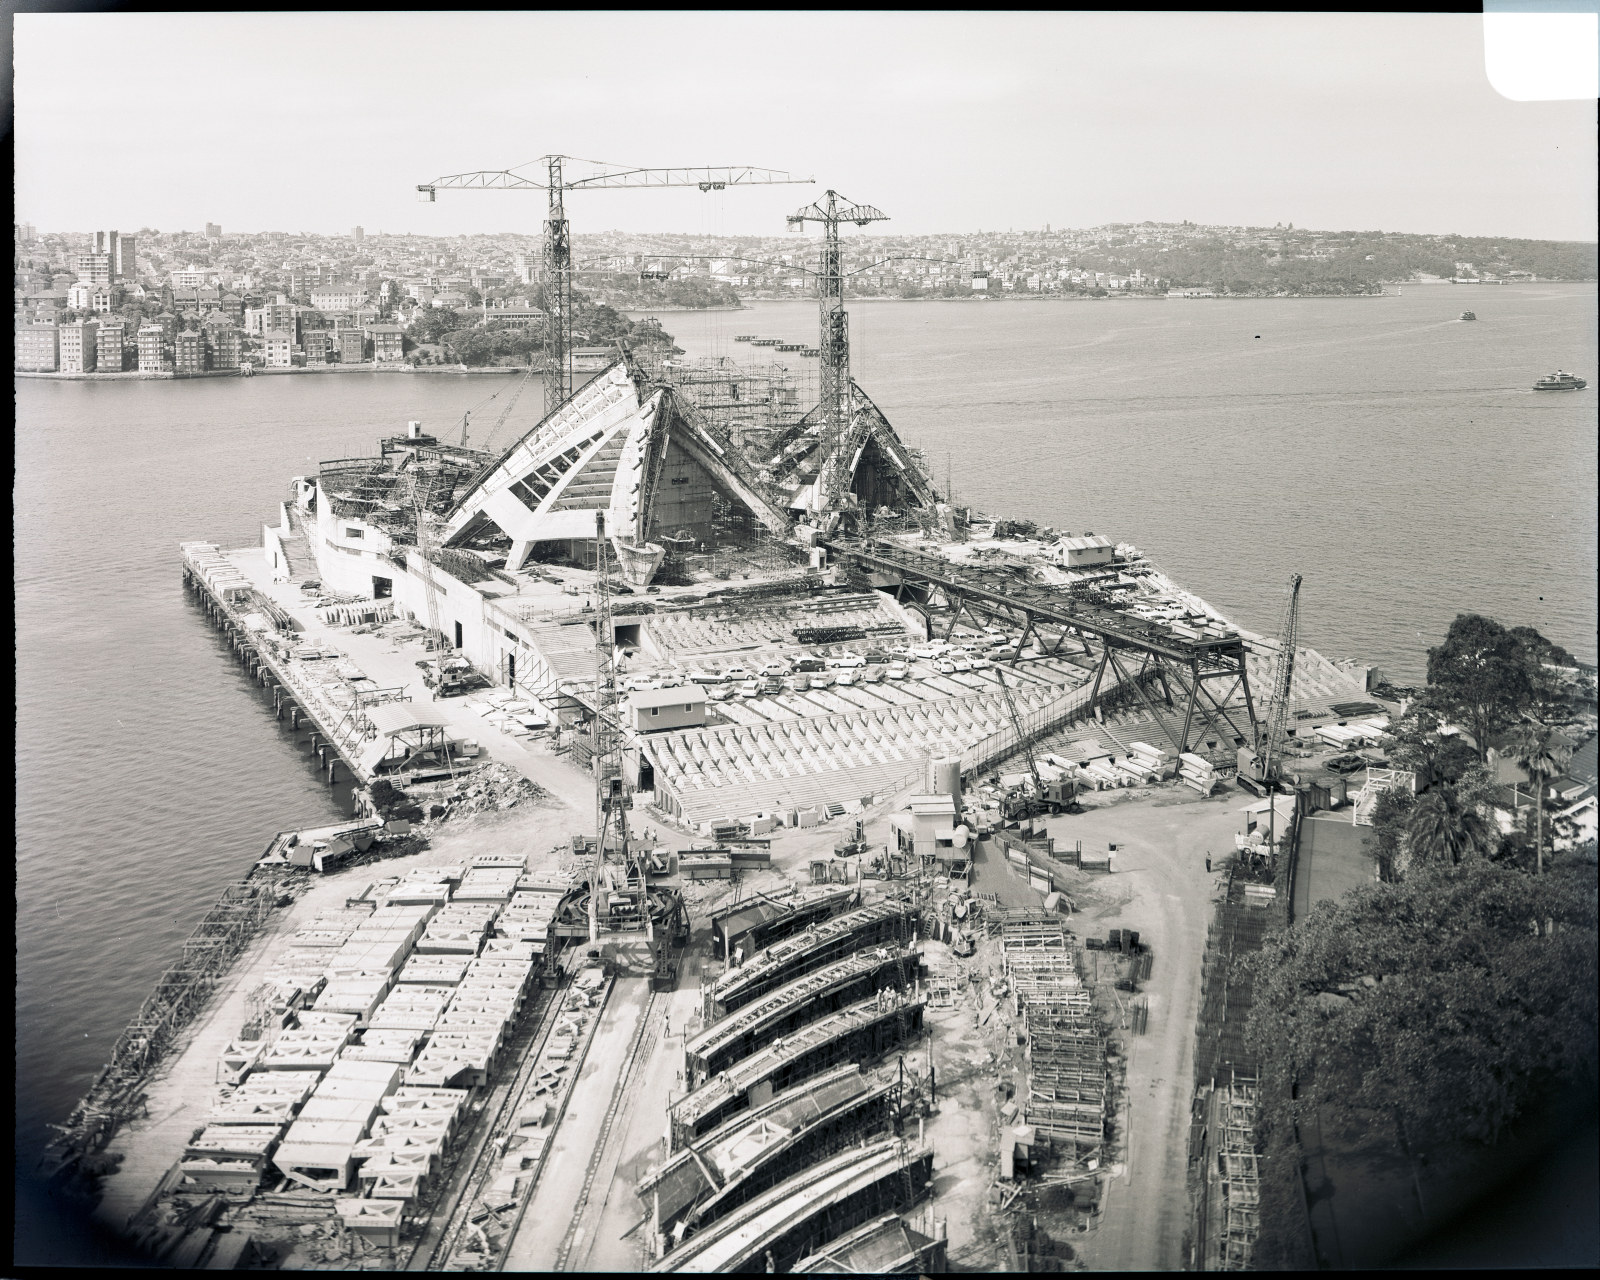 Government Printing Office 2 - 26338 - Opera House and surrounds from Unilever Building. South of site [Department of Public Works. Progress shots of Sydney Opera House; building construction] [GPO original locations or series - St67783] [20/11/1964]